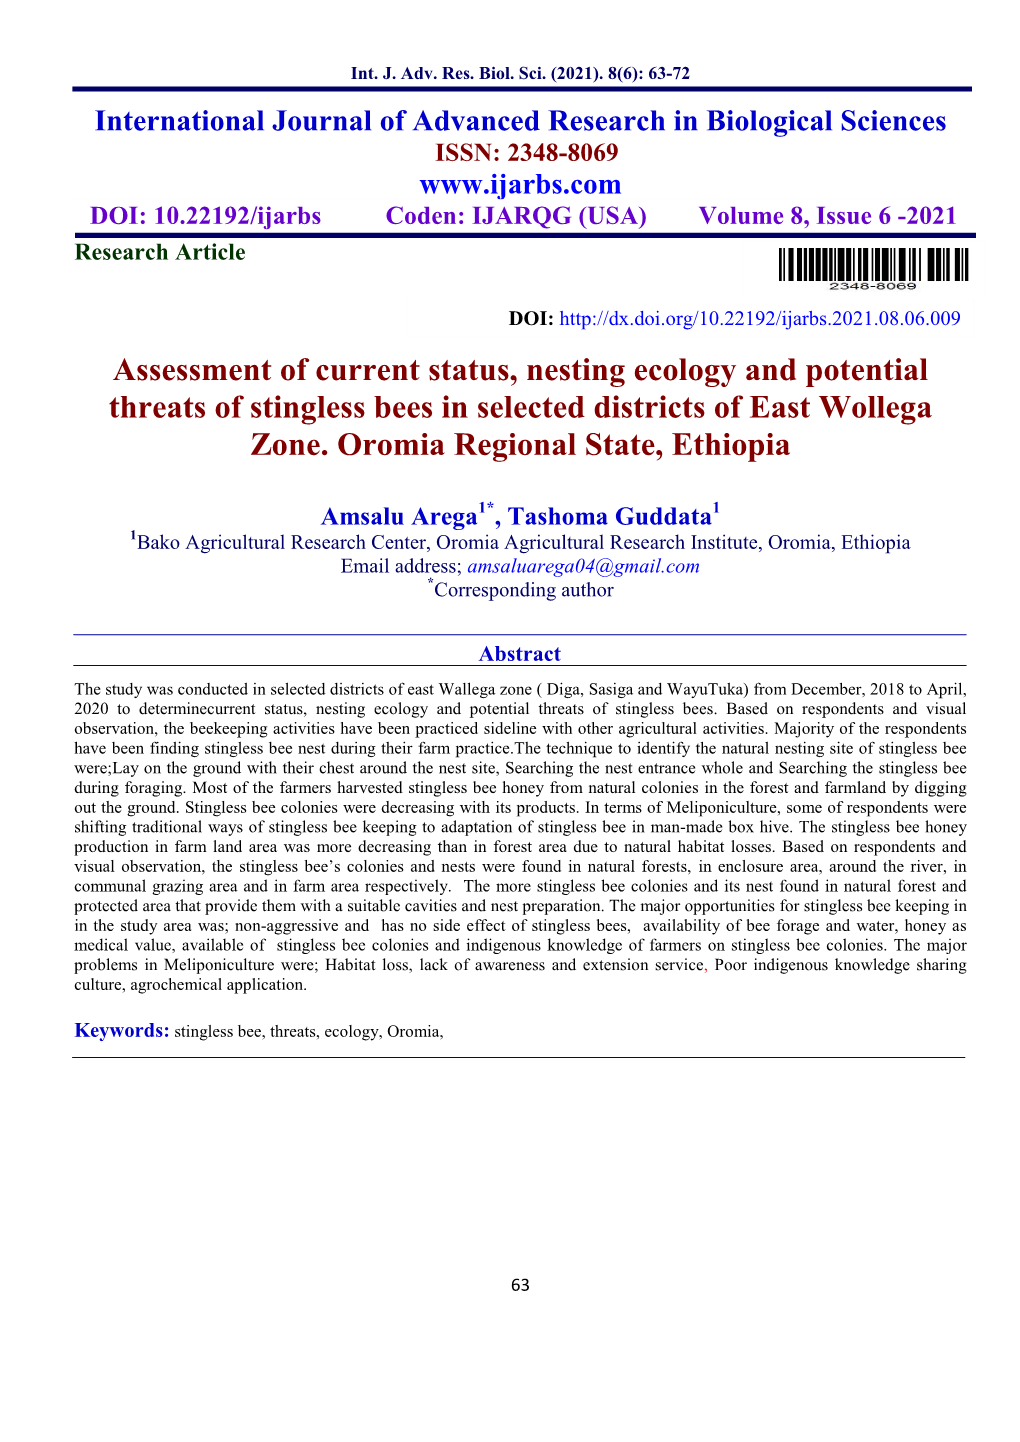 Assessment of Current Status, Nesting Ecology and Potential Threats of Stingless Bees in Selected Districts of East Wollega Zone